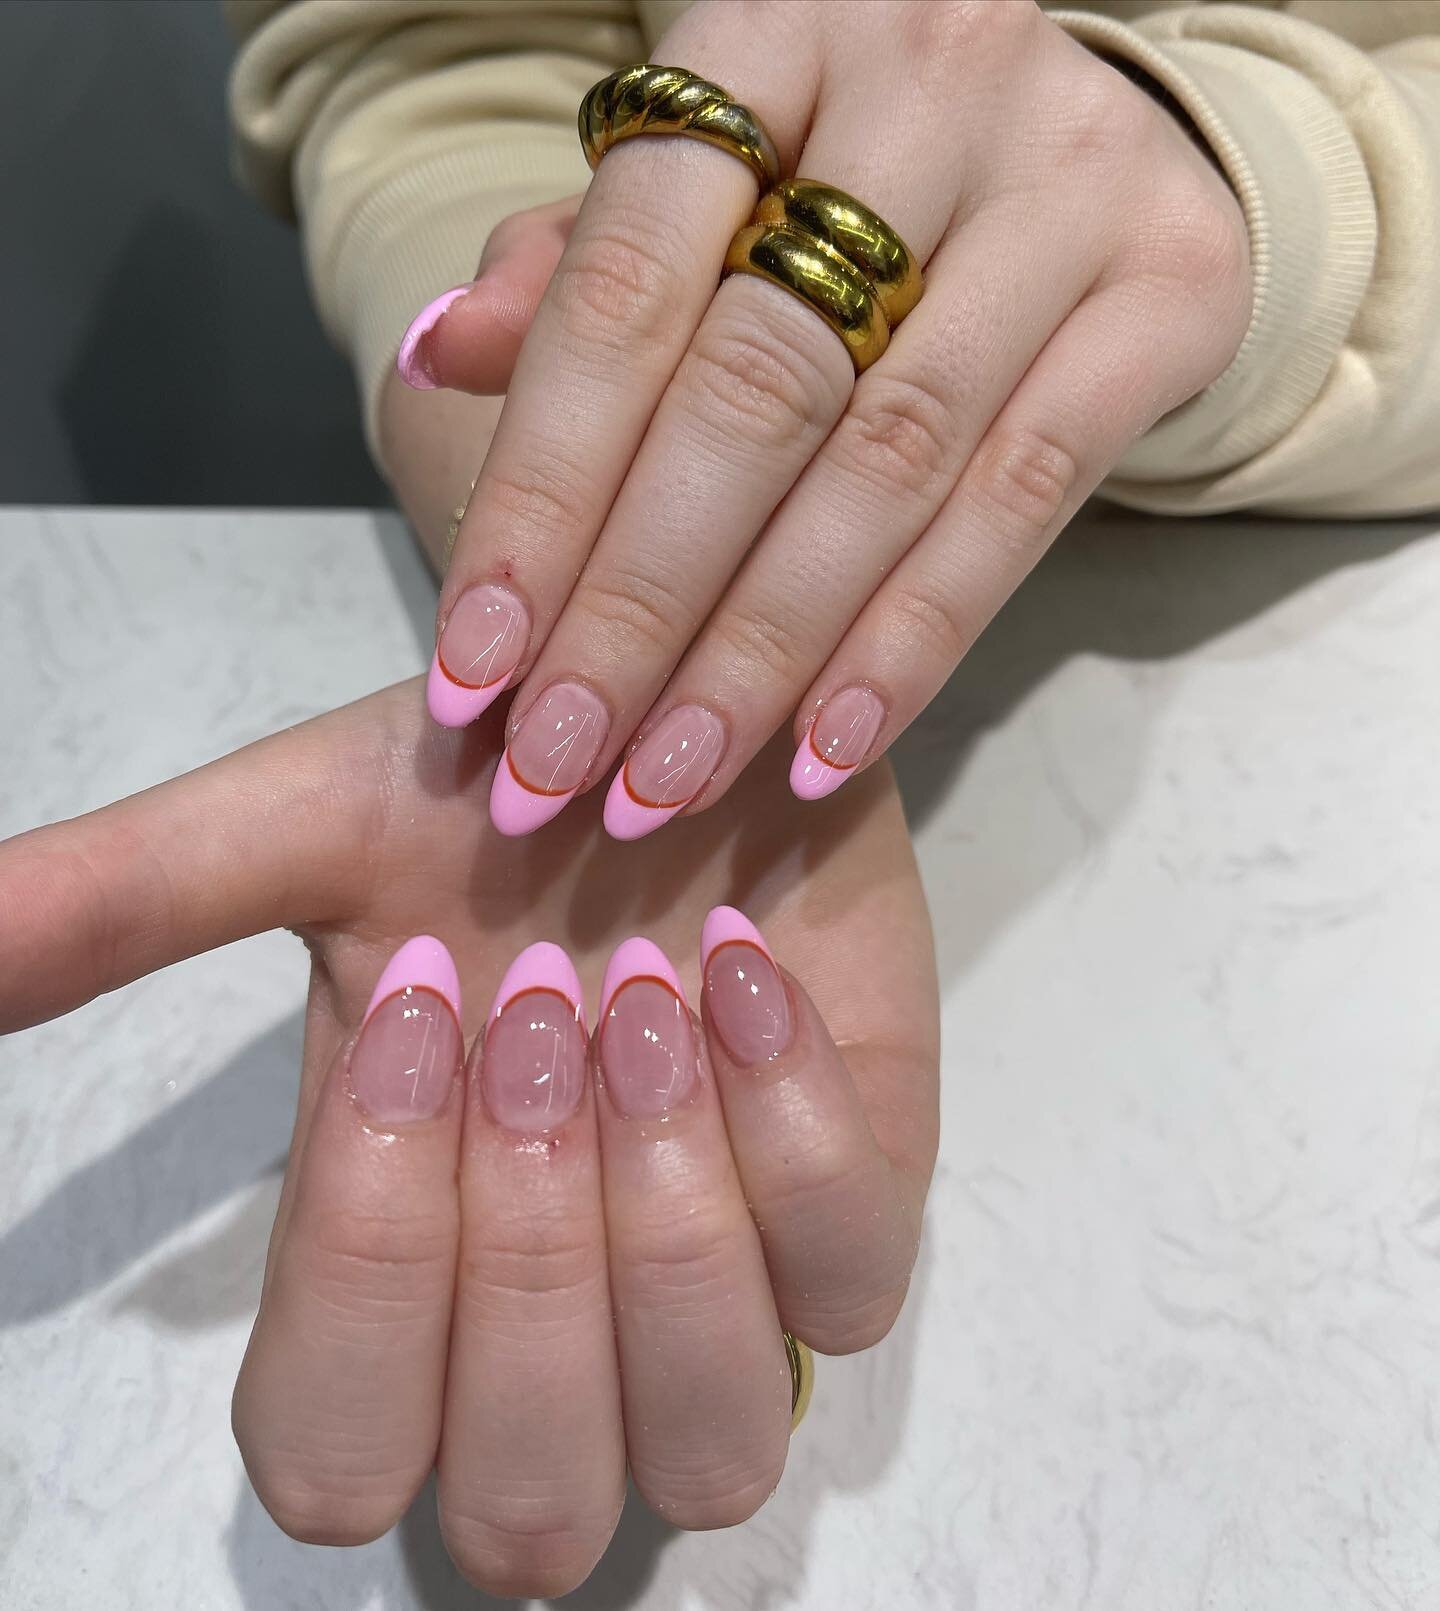 LEVEL OF DIFFICULTY: MEDIUM 10 NAILS. Whose ready for the spring?! 🌸🌷🍀🌹 only a few more days😄 #bostons #bostonsnailsandspa #bns #bostonnails #nailsofig #nails💅 #nailart #doublefrench